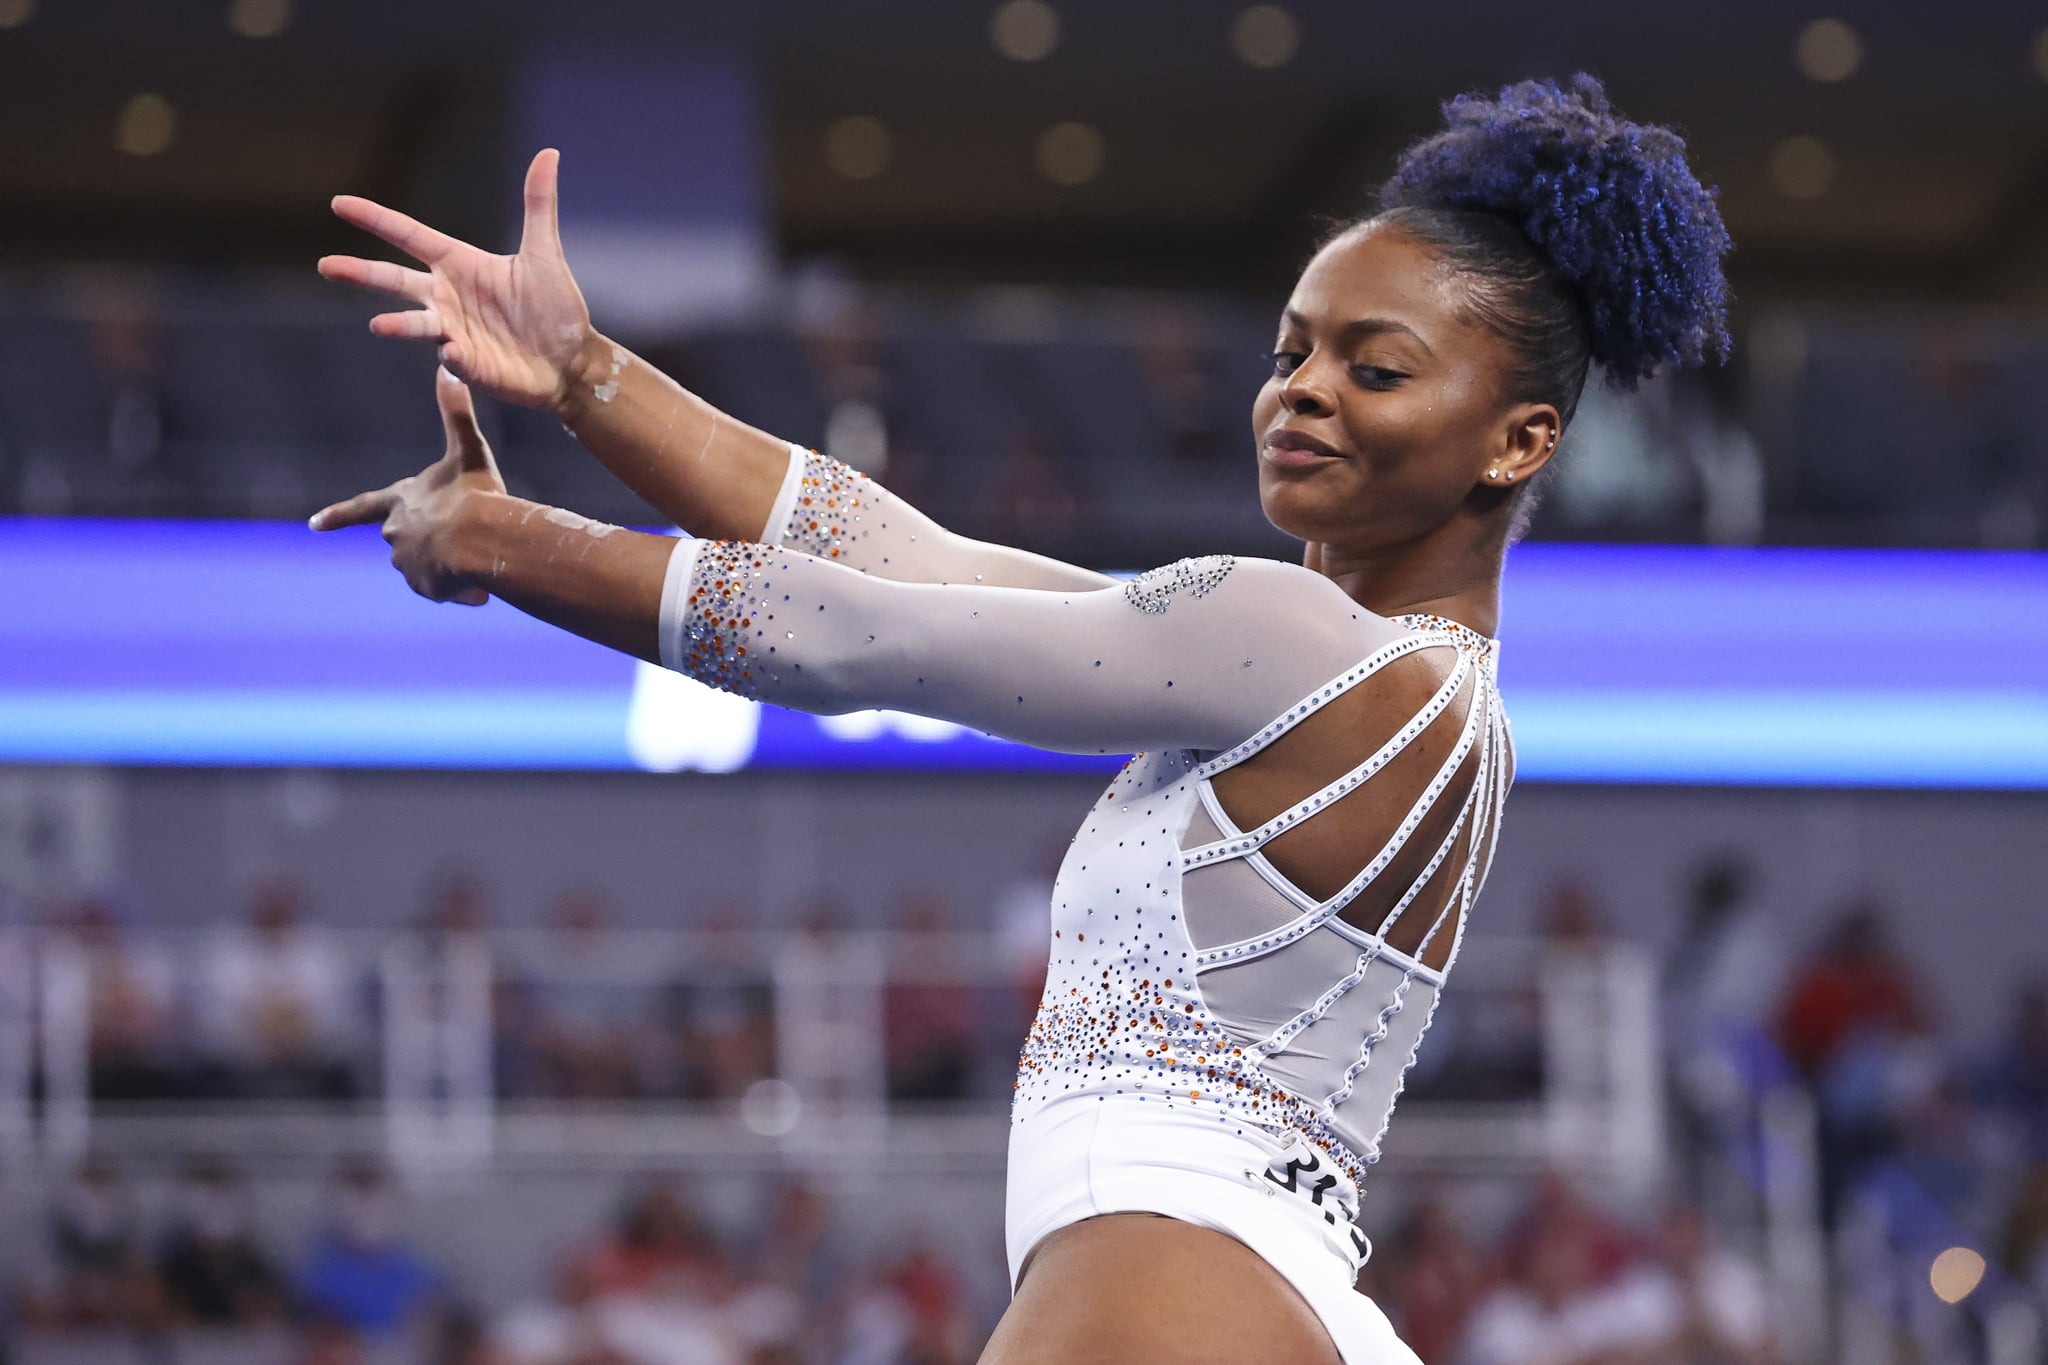 FORT WORTH, TX - APRIL 16: Trinity Thomas of the Florida Gators competes in the floor exercise during the Division I Womens Gymnastics Championship held at Dickies Arena on April 16, 2022 in Fort Worth, Texas. (Photo by C. Morgan Engel/NCAA Photos via Getty Images)